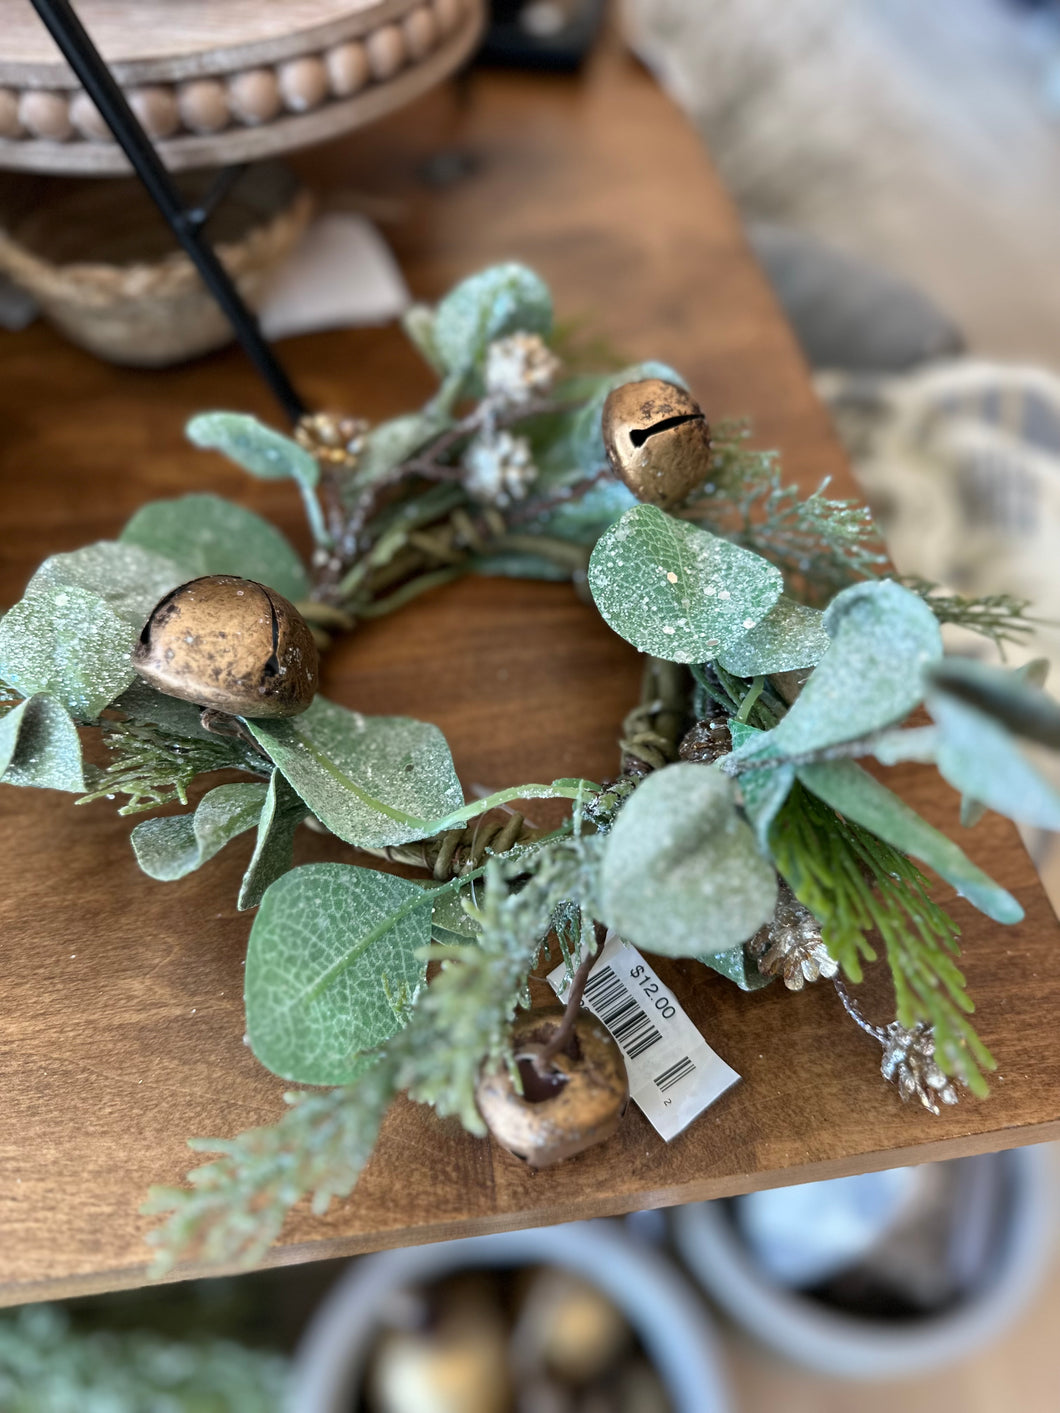 A decorative candle ring made with gold accents, eucalyptus leaves, cedar sprigs, small pine cones, and gold bells. The ring has a distressed finish and measures 10 inches in diameter with a 3-inch inner circle. It is perfect for a pillar candle.